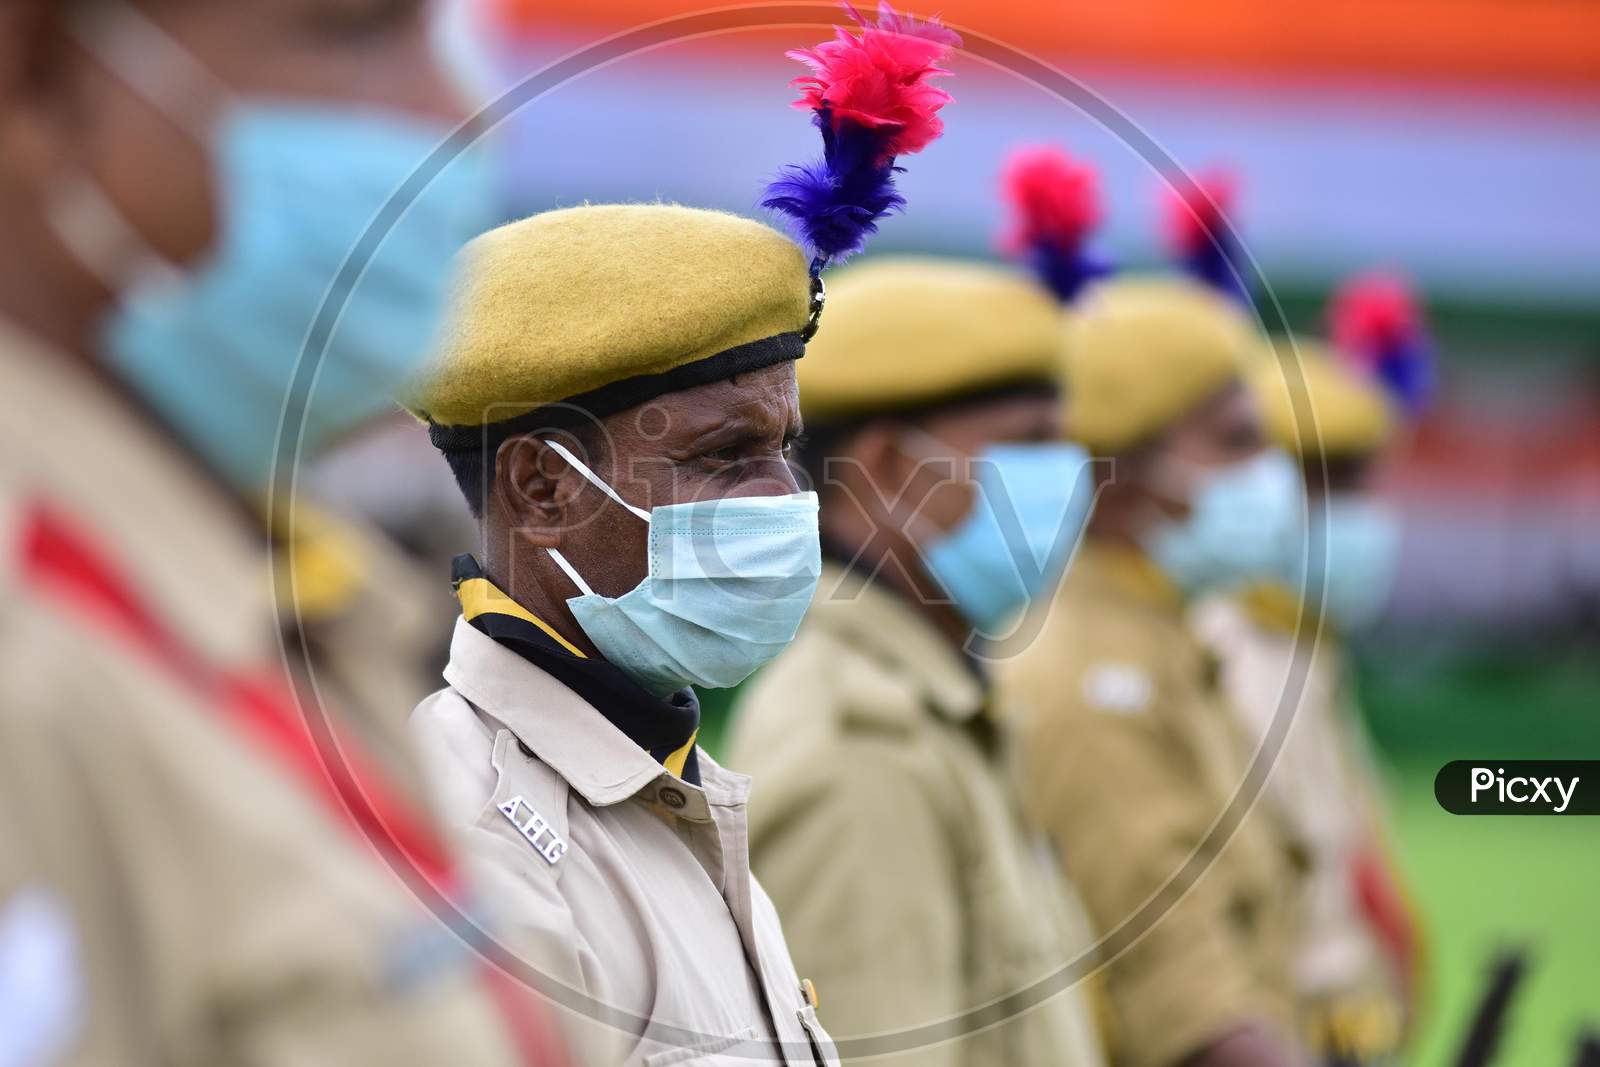 Assam Police Soldiers Take Part On The Occasion of 74th Independence Day Celebrations At Nurul Amin Stadium In Nagaon District Of Assam On August 15, 2020